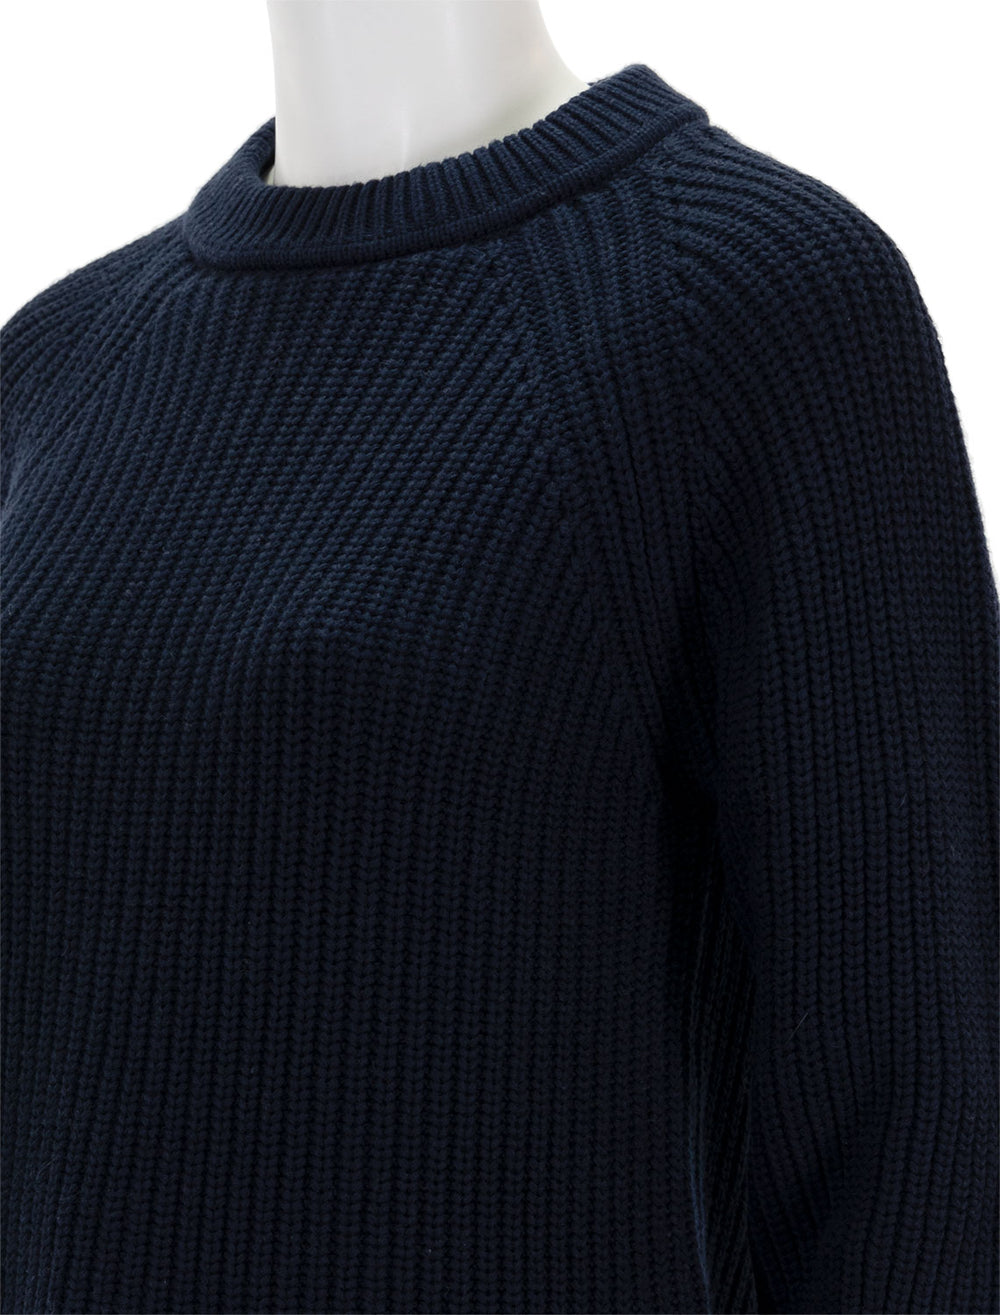 Close-up view of Alex Mill's Amalie Pullover Sweater in Navy.